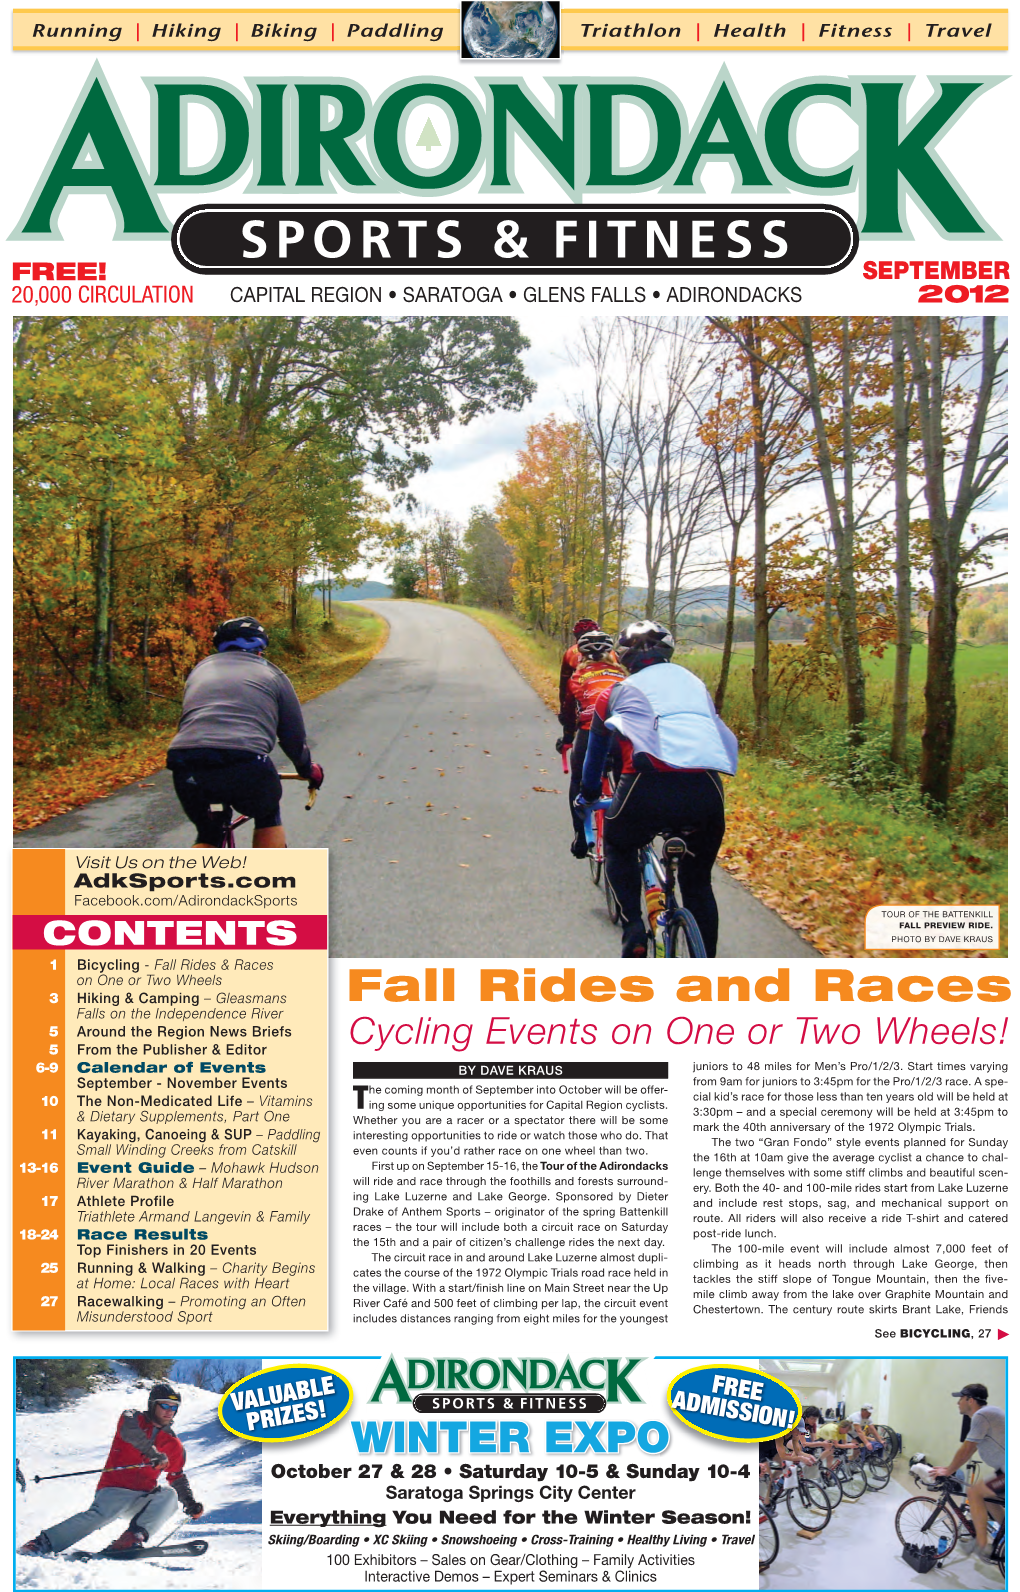 Fall Rides and Races